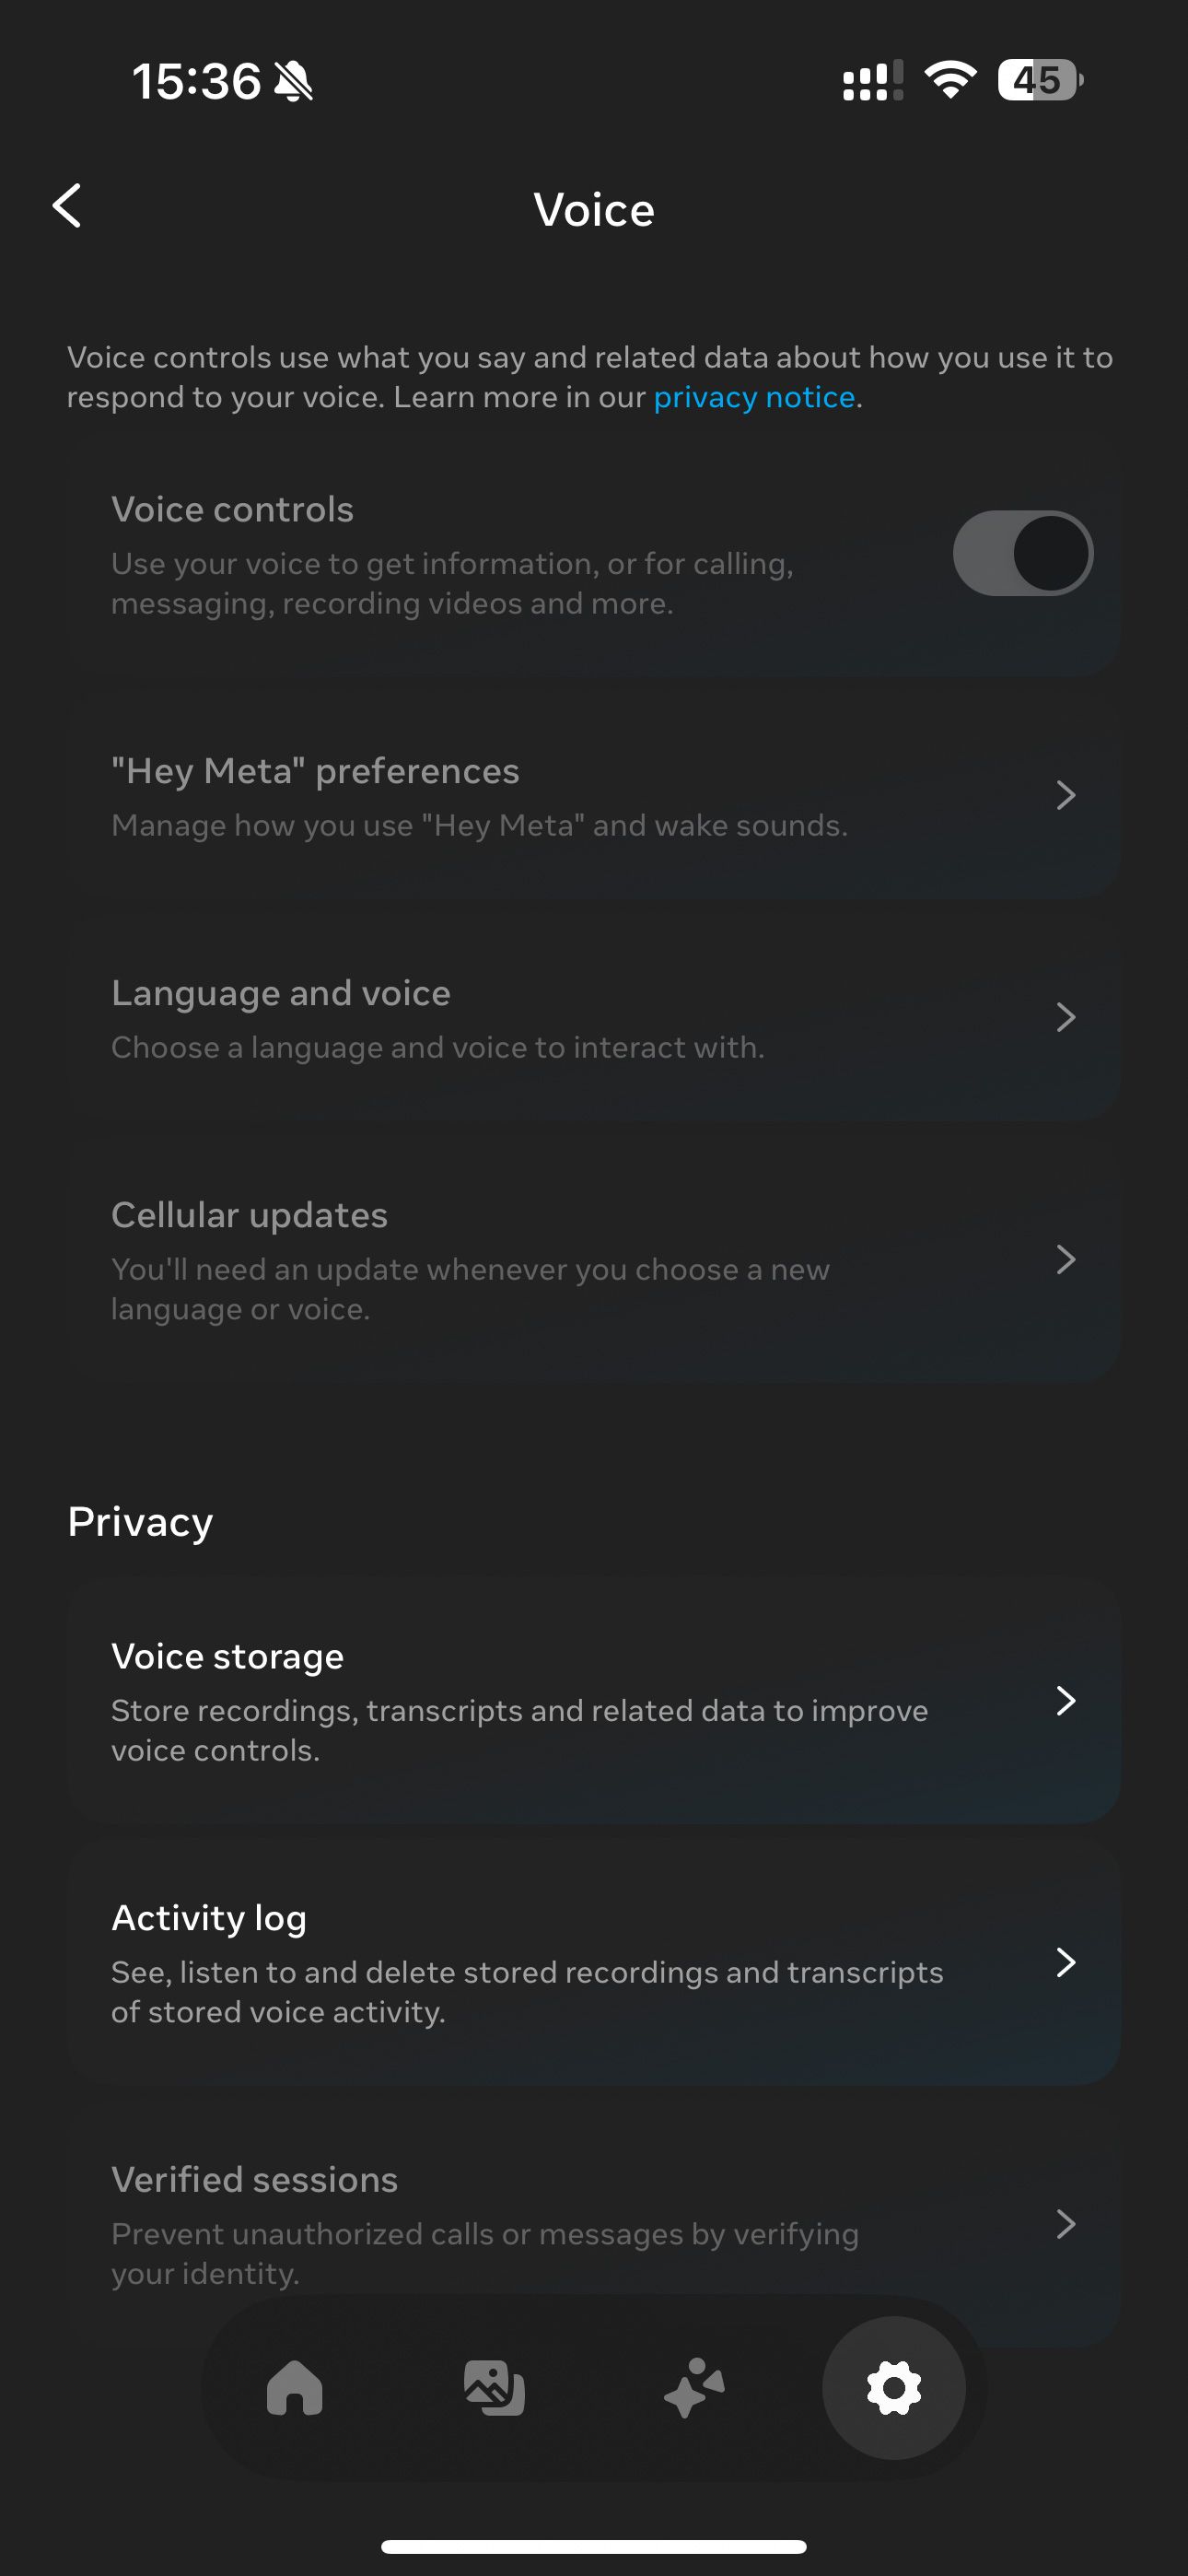 Ray-Ban Meta View app showing the voice control options